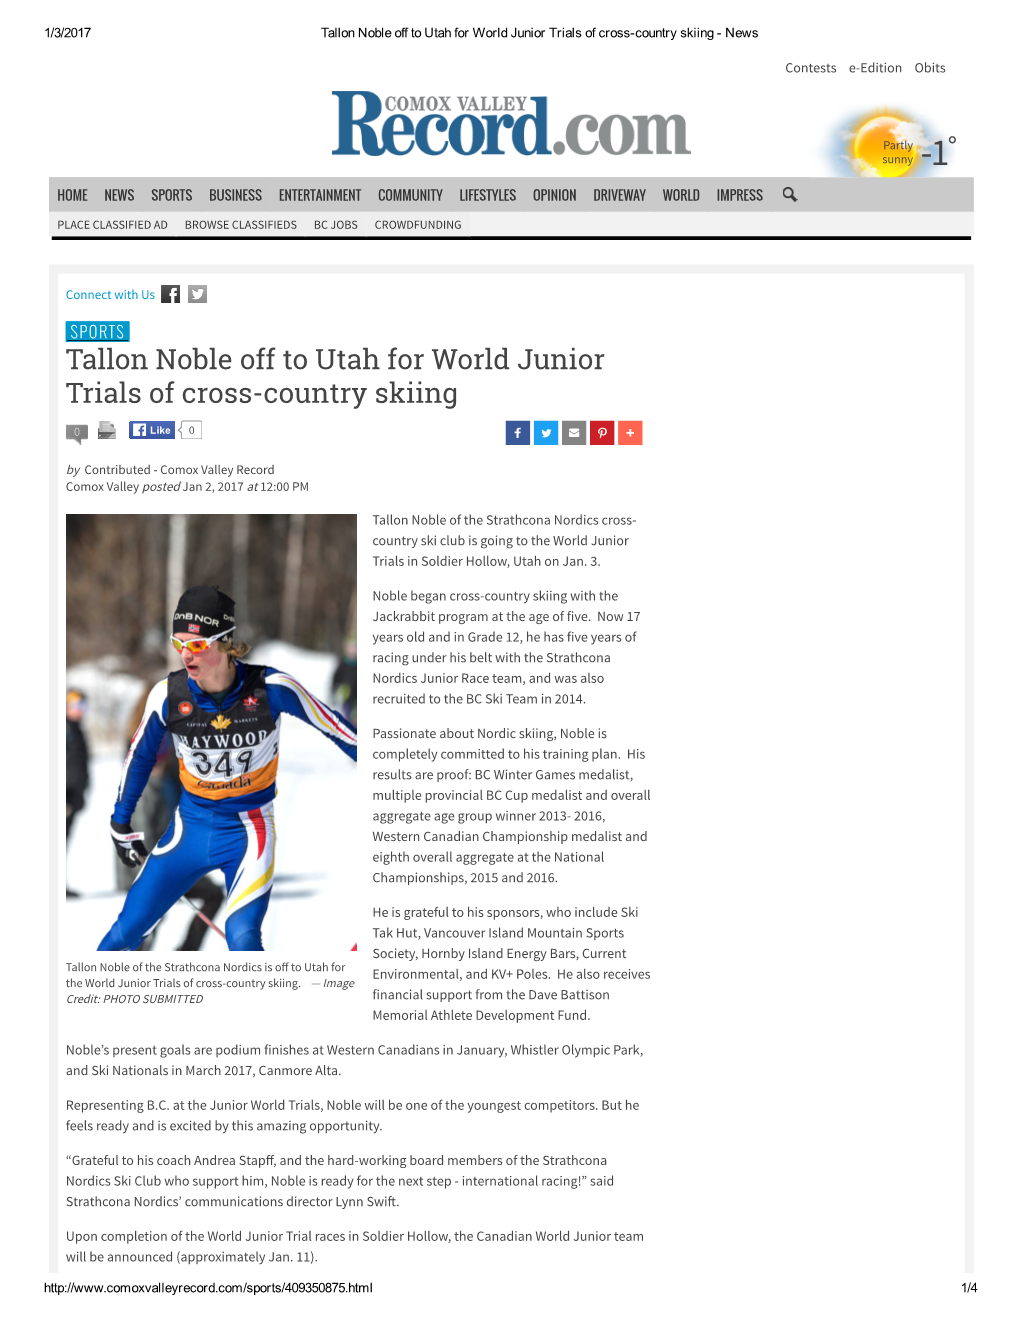 Tallon Noble Off to Utah for World Junior Trials of Cross-Country Skiing